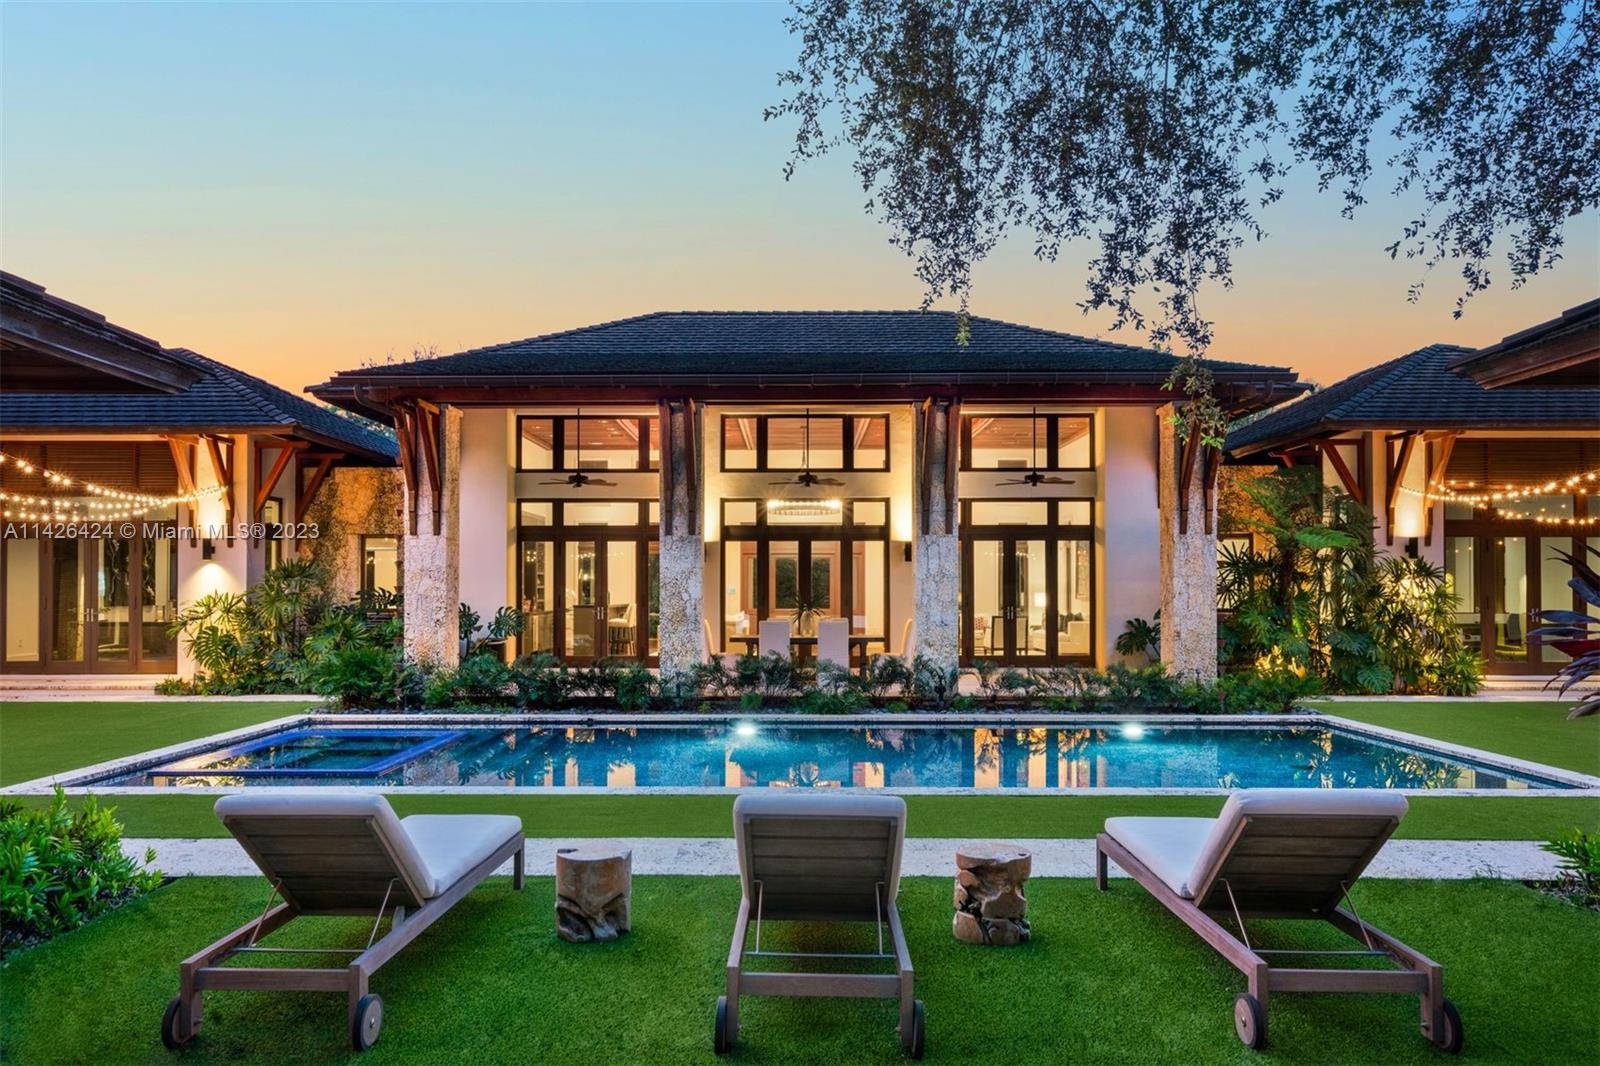 This magnificent 7,685 SF gated residence on 35,719 SF of lush, landscaped grounds was designed in 2015 by renowned architect Cesar Molina of CMA Design Studio. Capturing the allure of tropical Bali modern architecture, the use of elegant Cumaru wood and Native Oolite stone infuses the home with a natural and inviting ambiance. Every detail was meticulously attended to when customizing this retreat-style home, incorporating the finest designer finishes and modern conveniences. The home has 16-ft ceilings, 5 bedrooms, 6.5 bathrooms, a tremendous chef's kitchen with luxury appliances, and sprawling indoor/outdoor entertainment areas. Includes a Control4 security system, covered summer kitchen, saltwater pool, captivating water features, putting green, and a full-house generator.